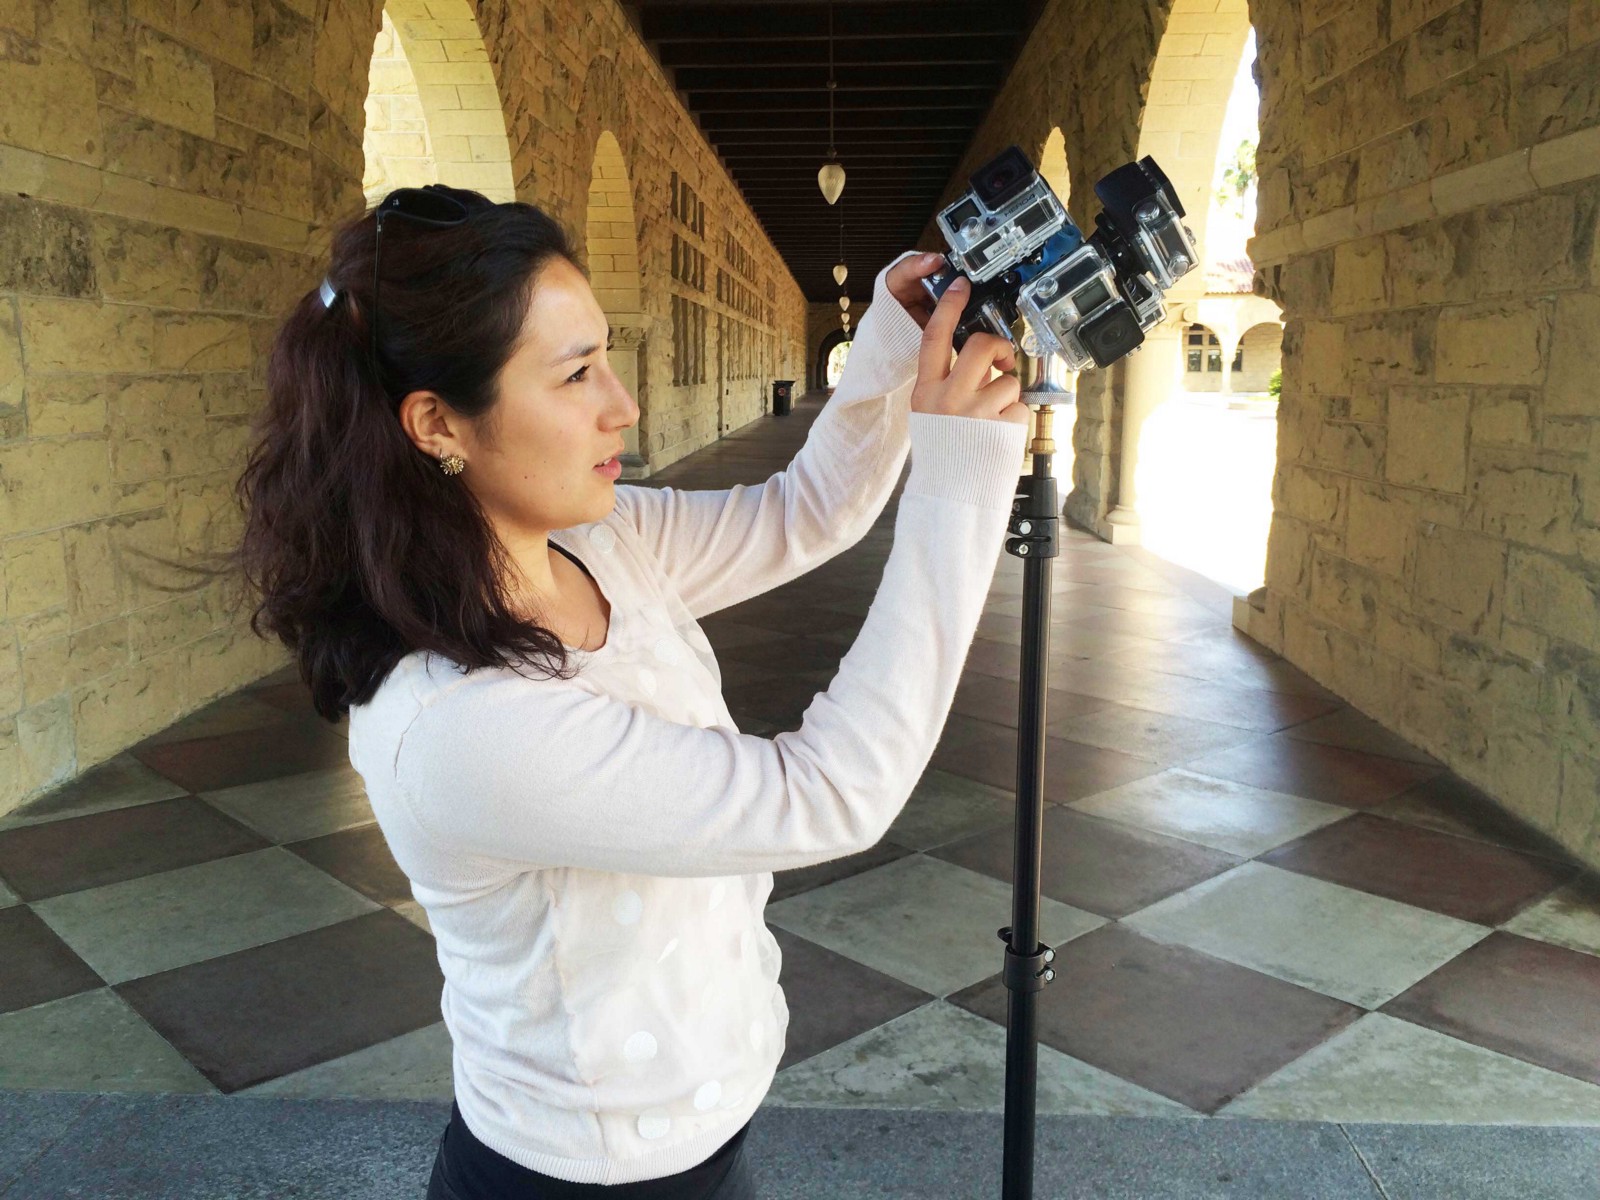 Master’s student Naomi Cornman (Stanford Media Studies ’16) worked with classmate Anna Yelizarova on a series of 360-video stories about sports that published on Peninsula Press, the Stanford Journalism Program’s local news website.